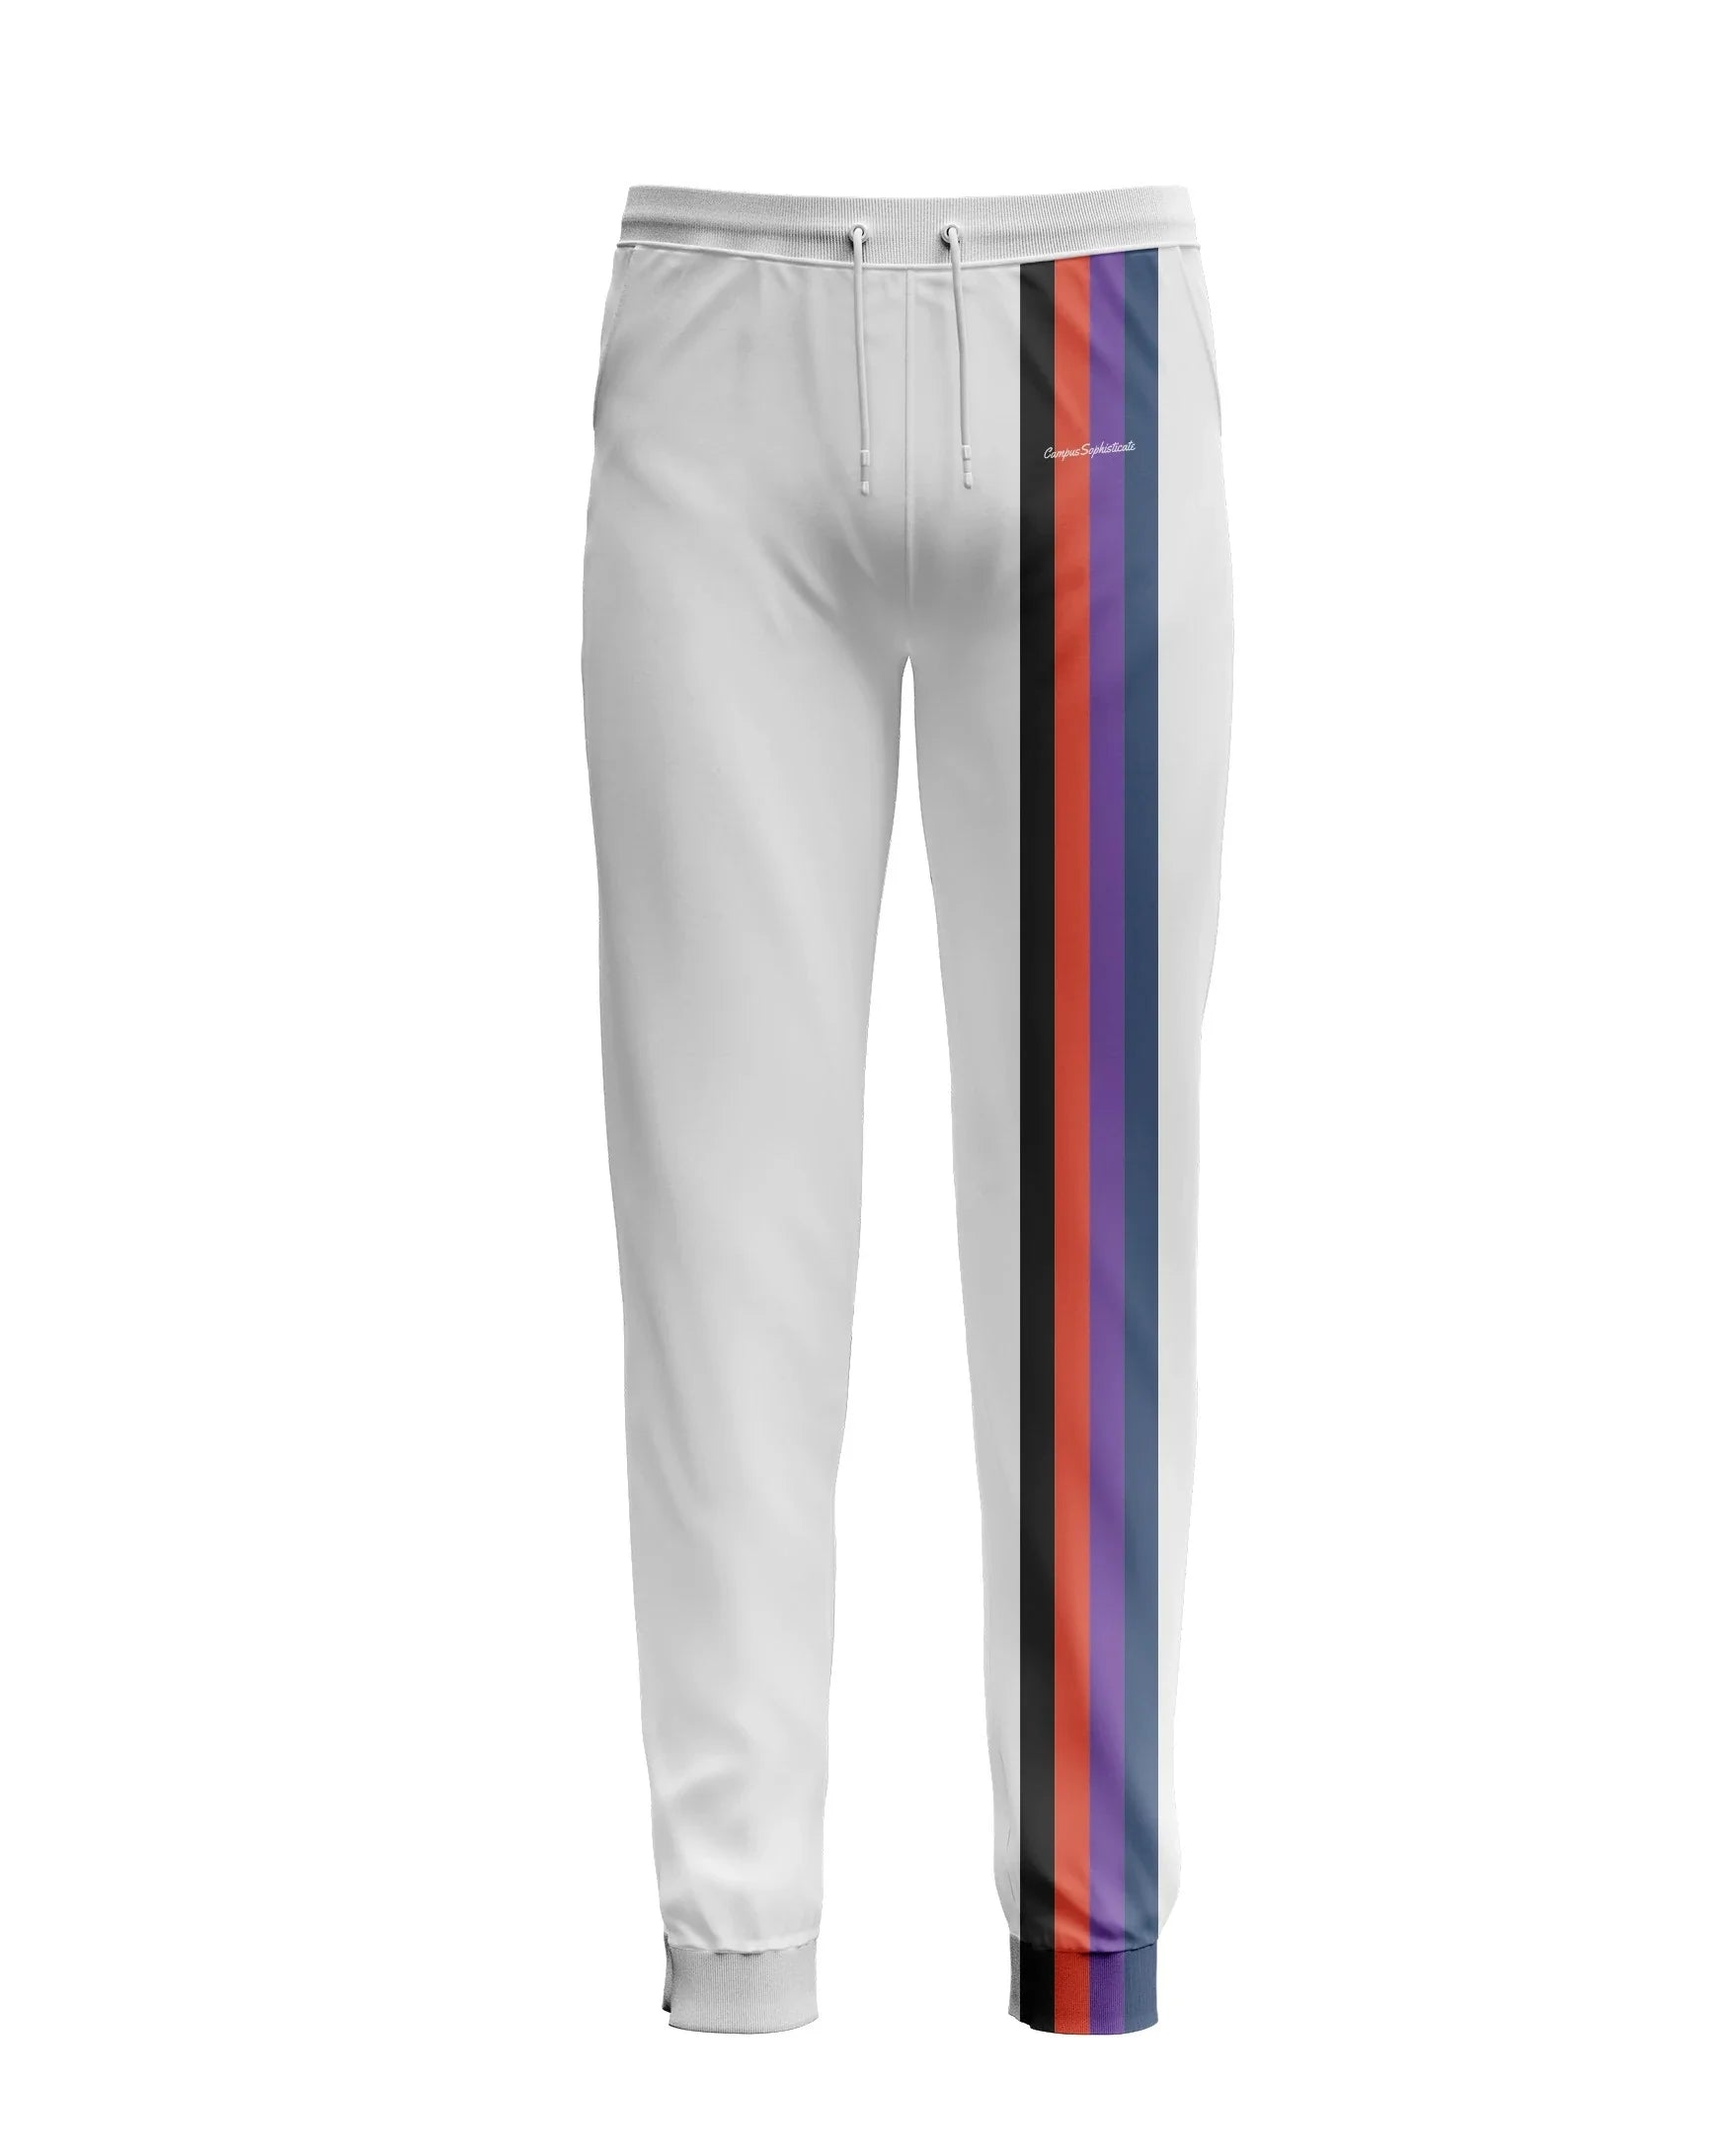 White Sweatpants Campussophisticate activewear